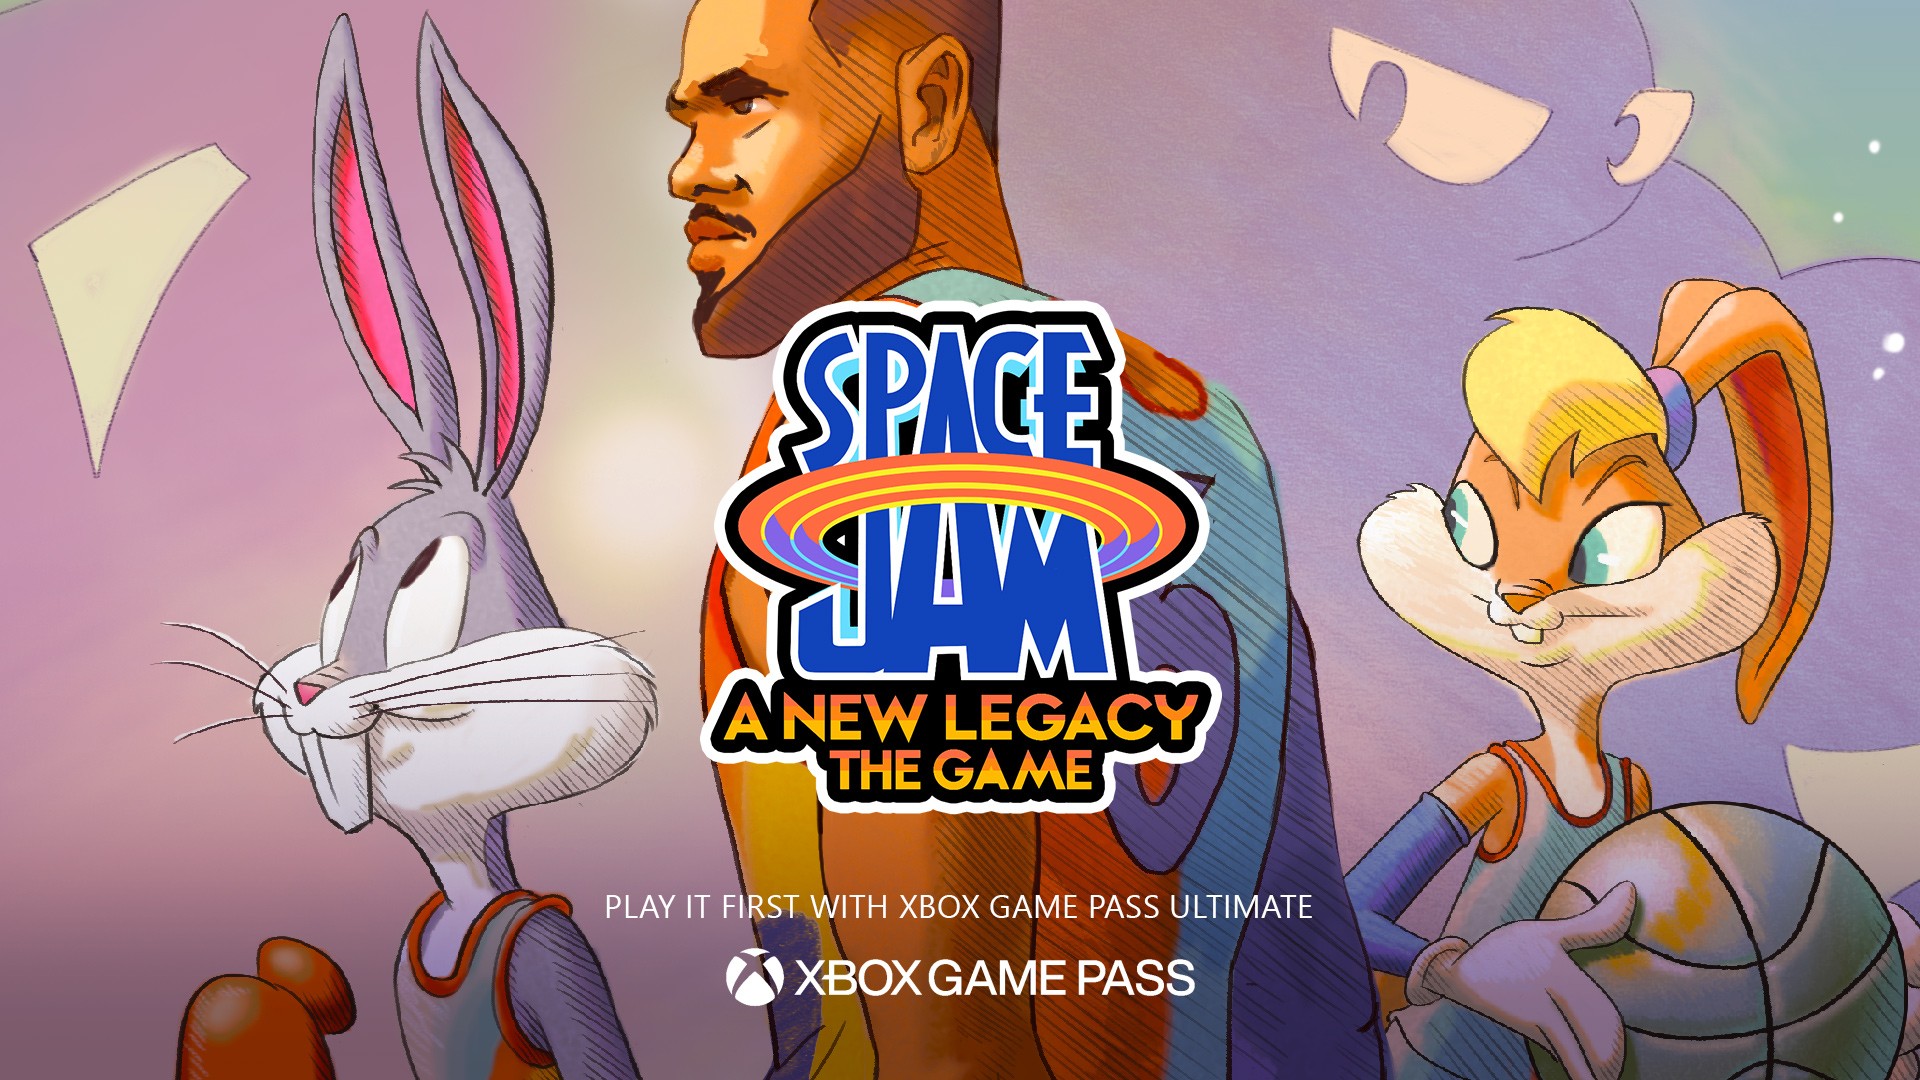 Images released of Goon Squad from 'Space Jam: A New Legacy